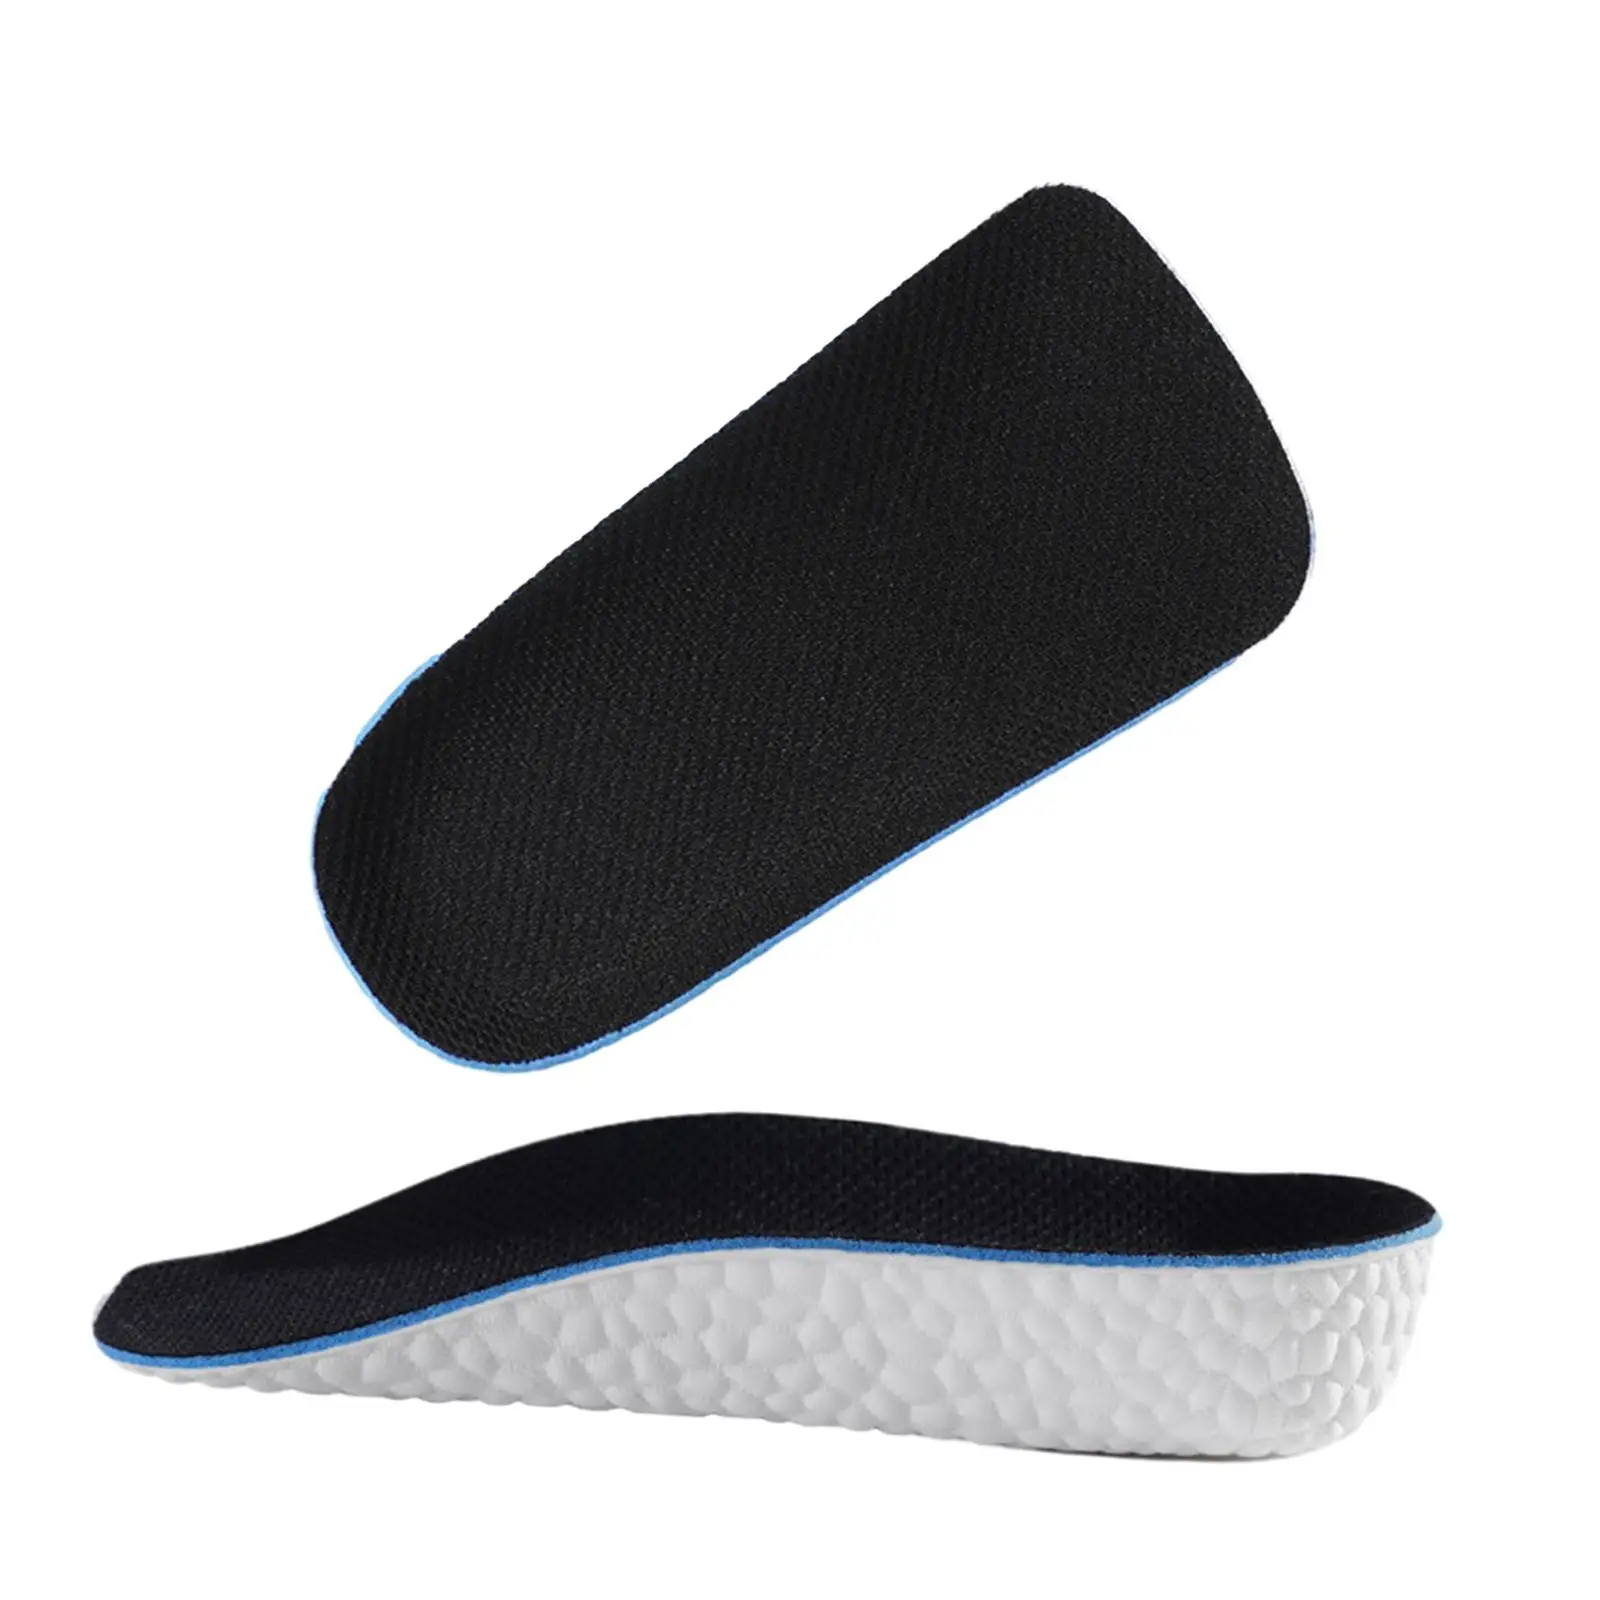 2Pcs Height Increase Insoles Shock Absorption Soft Non Slip Heel Lifts Cushion Pads for Running High Heels Walking Hiking Boots